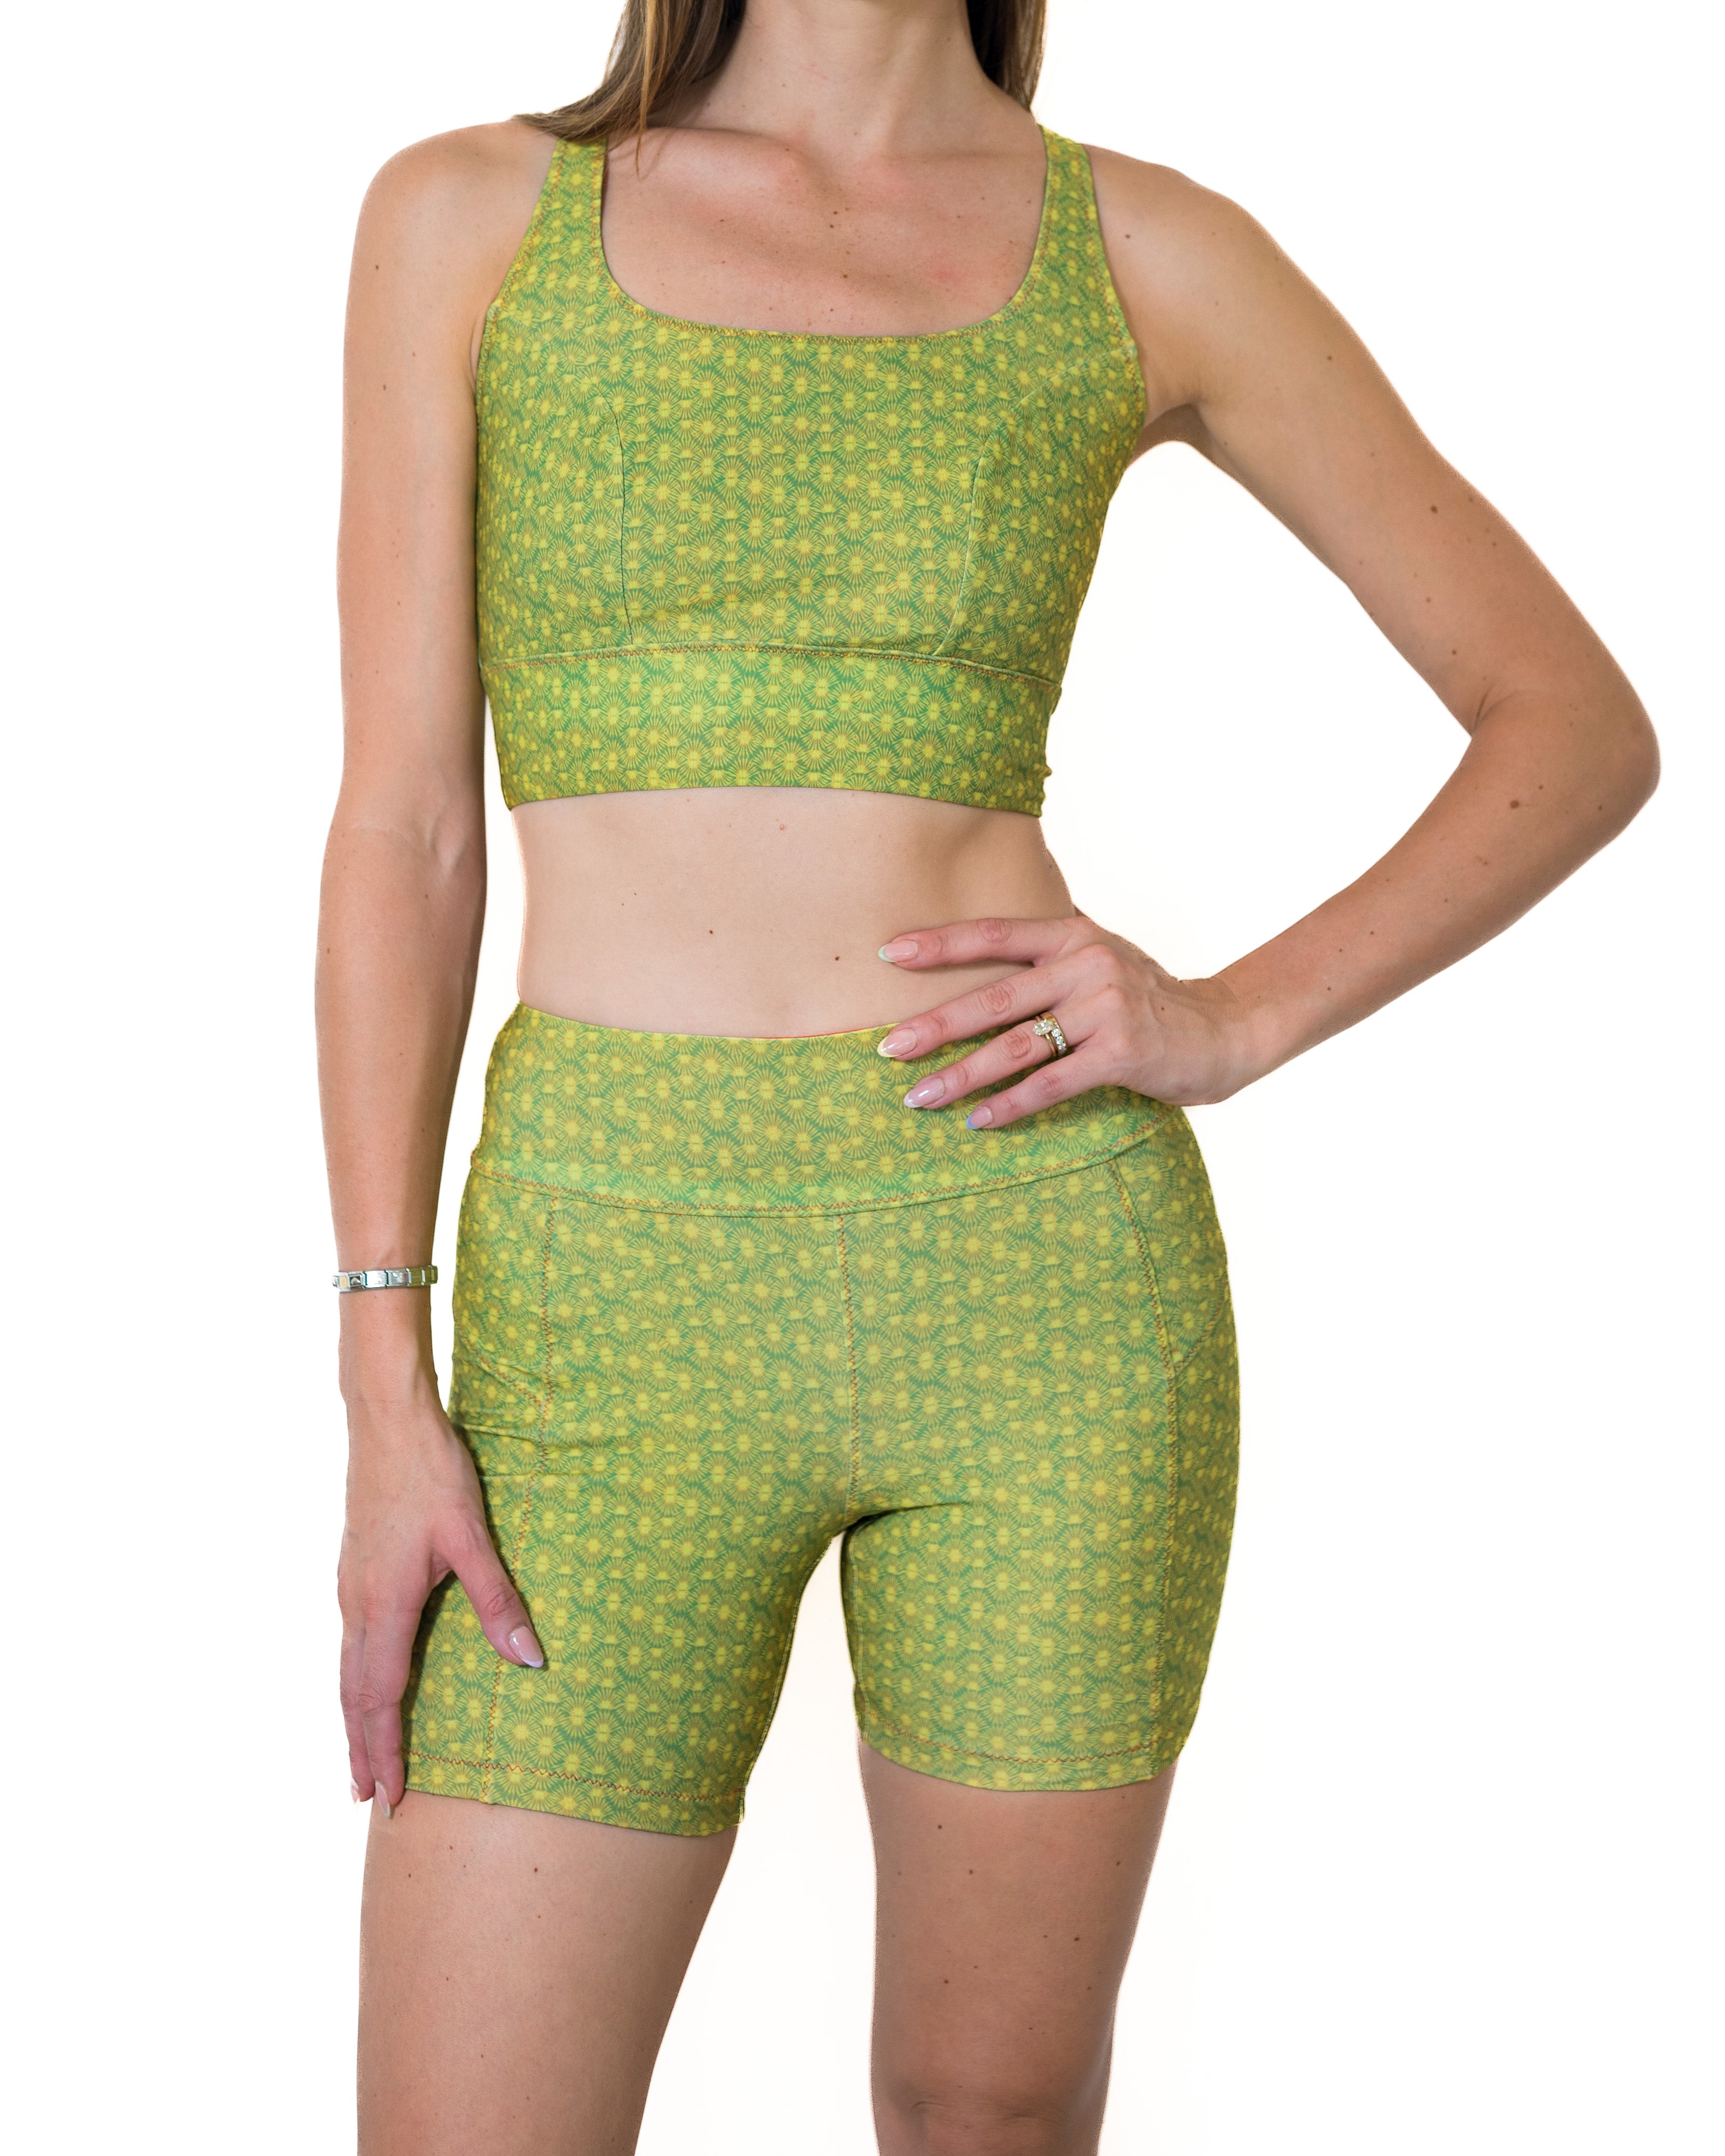 Aima Dora - High Waisted Shorty - Front / Turtle Bay -  Baie aux tortues